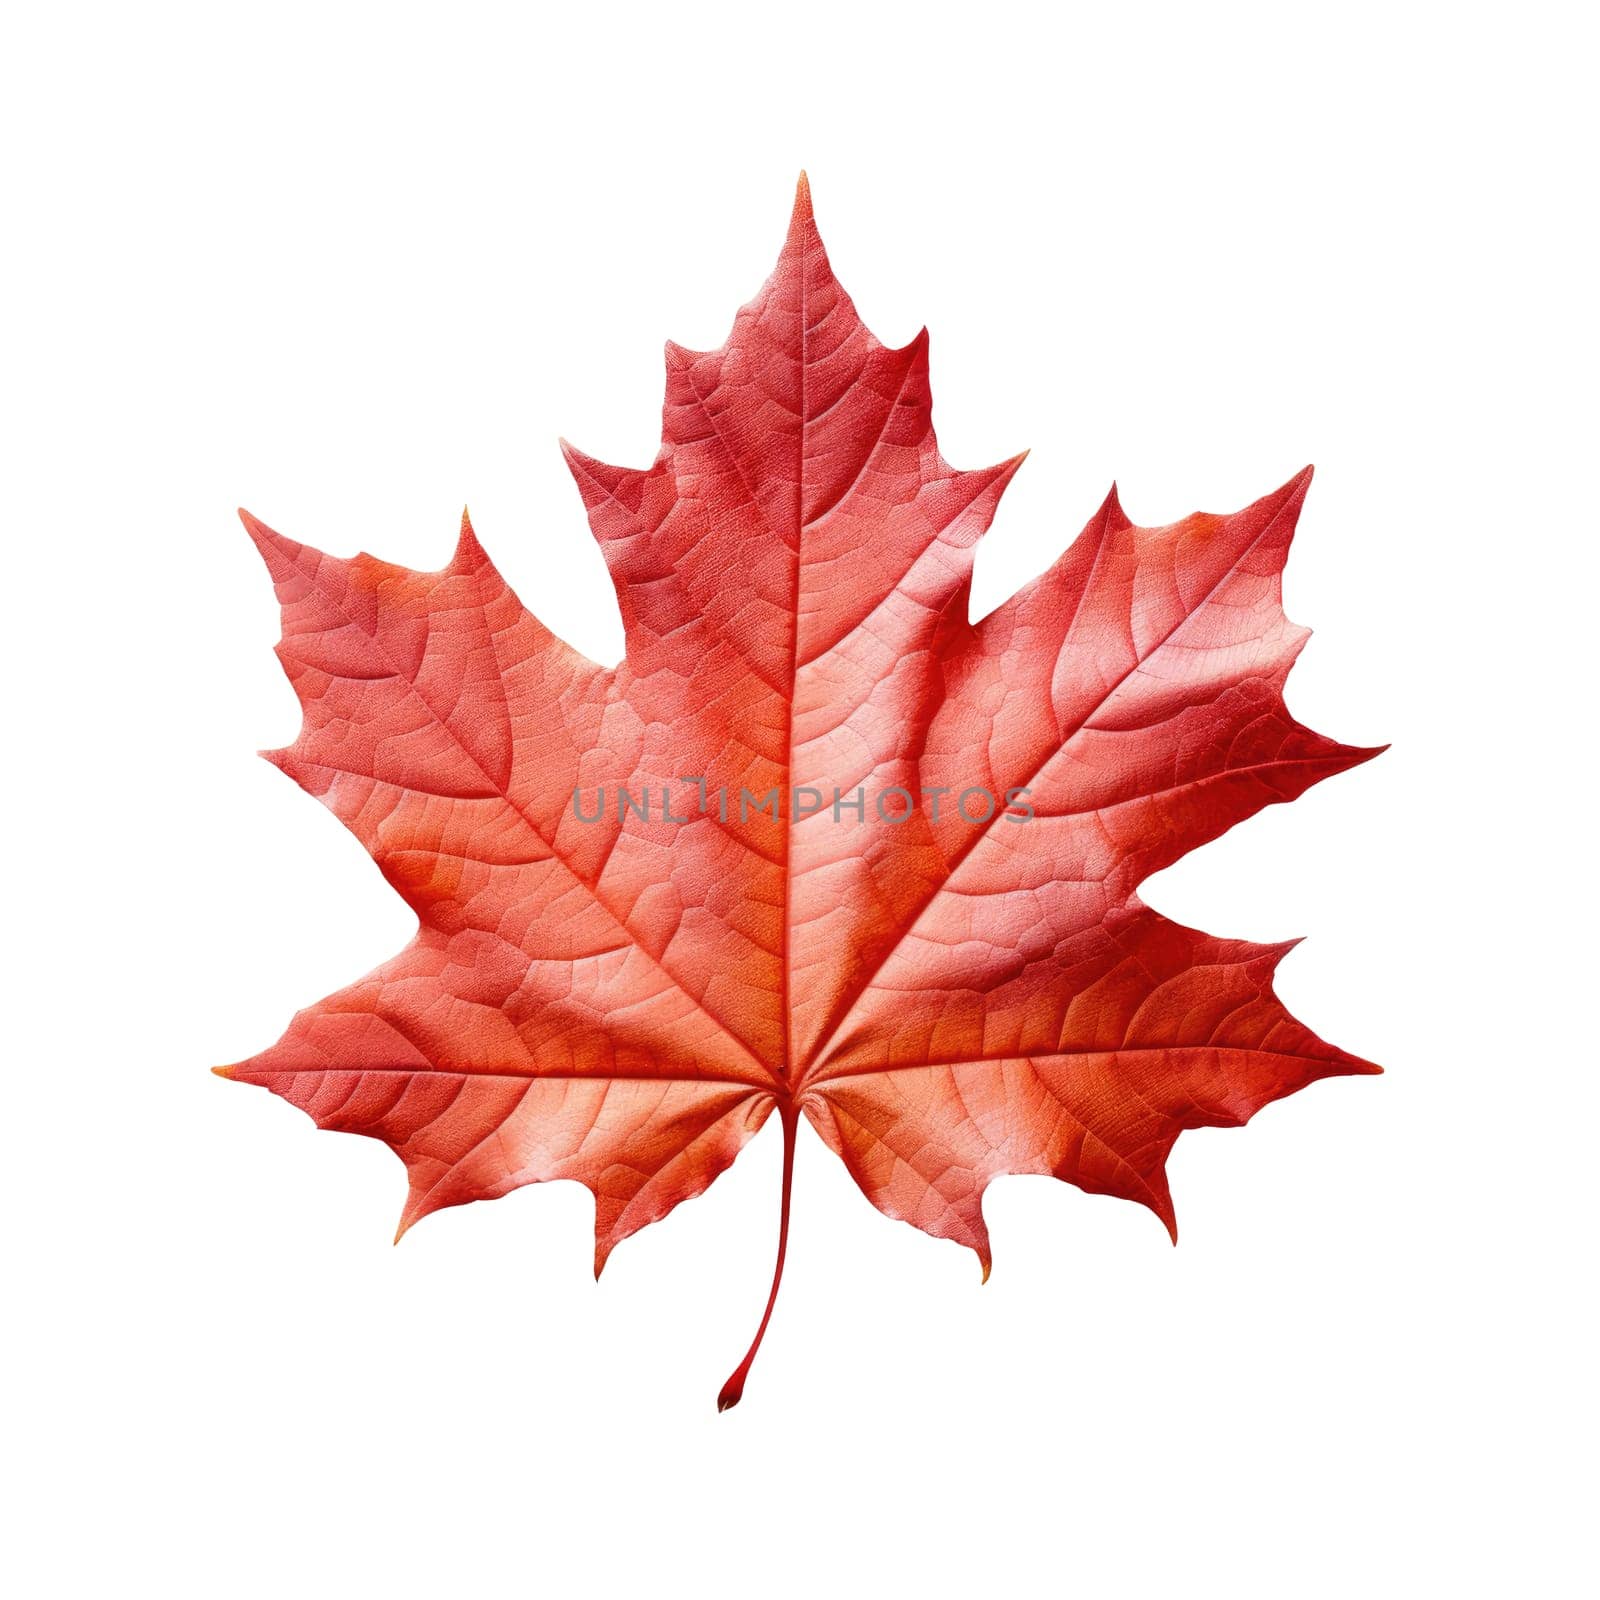 Red maple leaf as an autumn symbol as a seasonal themed concept. Isolated white background.